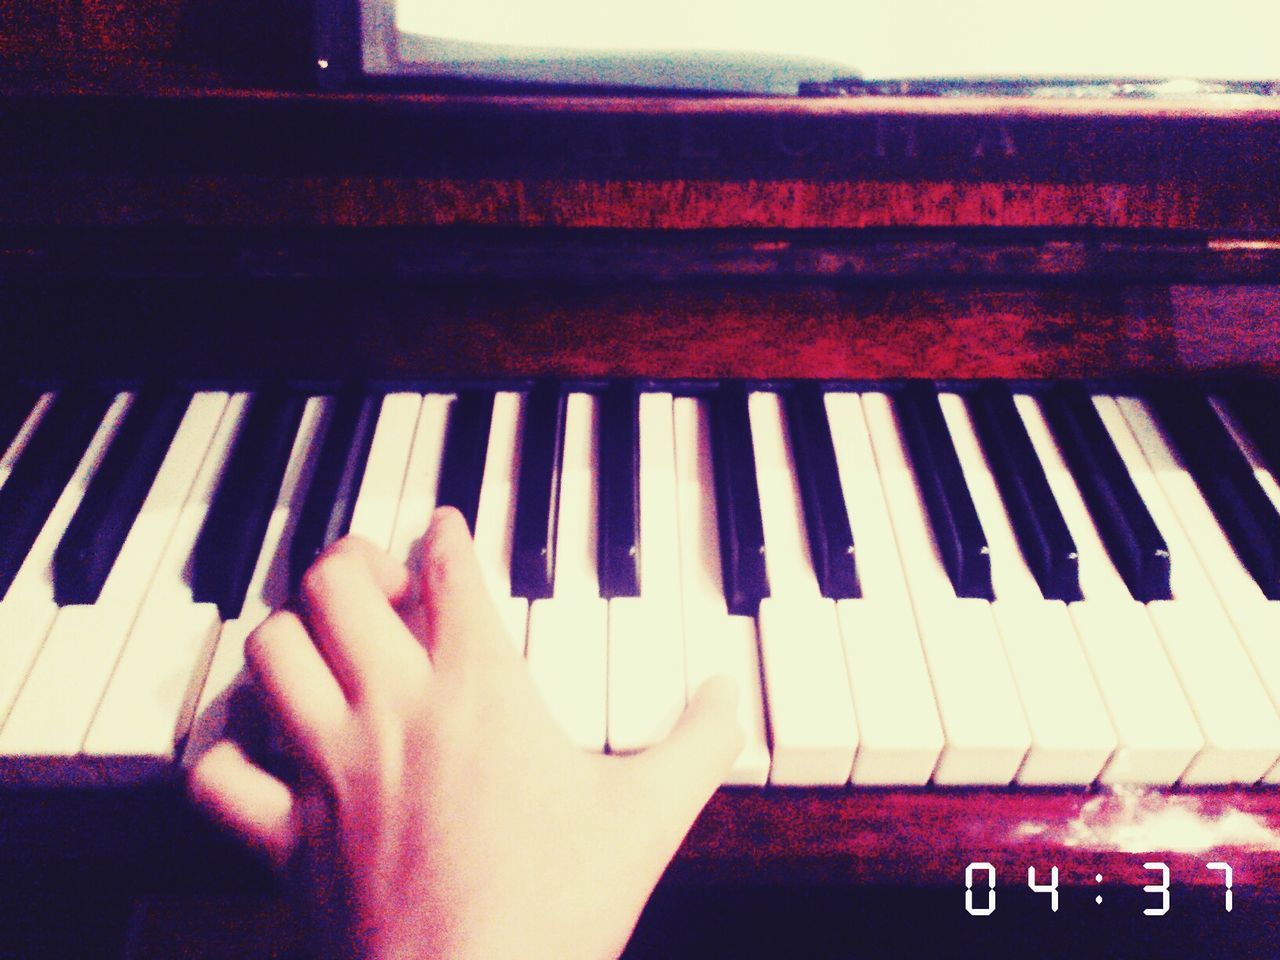 indoors, person, part of, piano, close-up, cropped, music, unrecognizable person, arts culture and entertainment, human finger, piano key, musical instrument, lifestyles, communication, leisure activity, high angle view